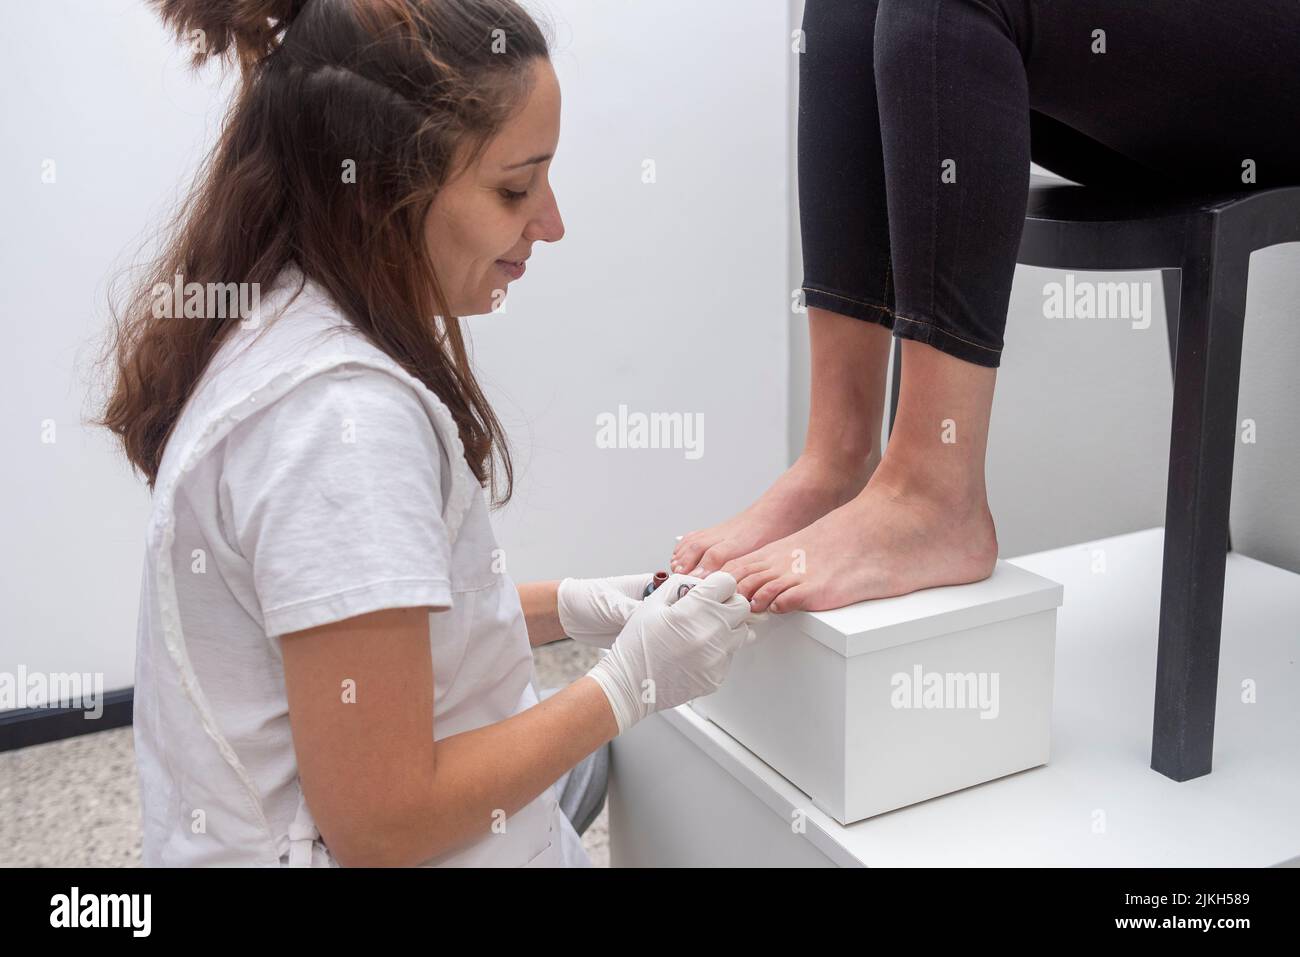 A female performing podiatry treatment in an aesthetic center Stock Photo